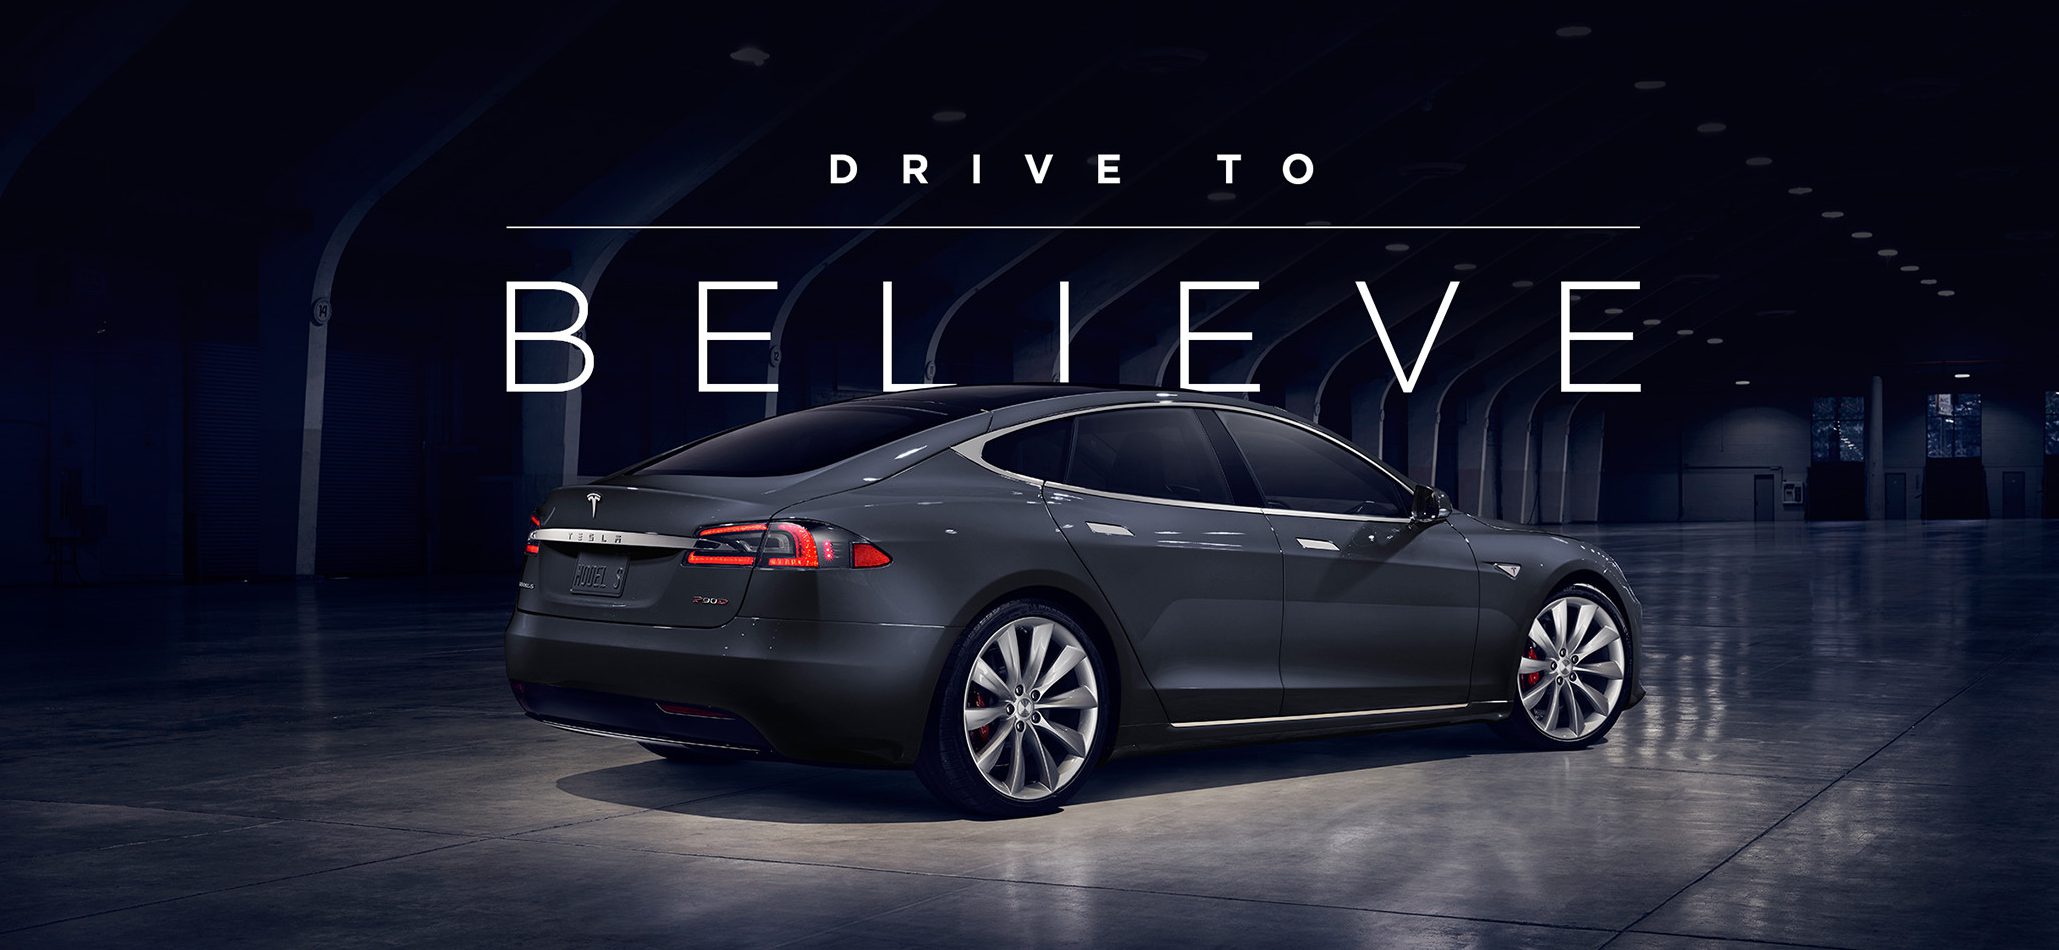 Tesla launches 'Drive to Believe' challenge, invites people to swap